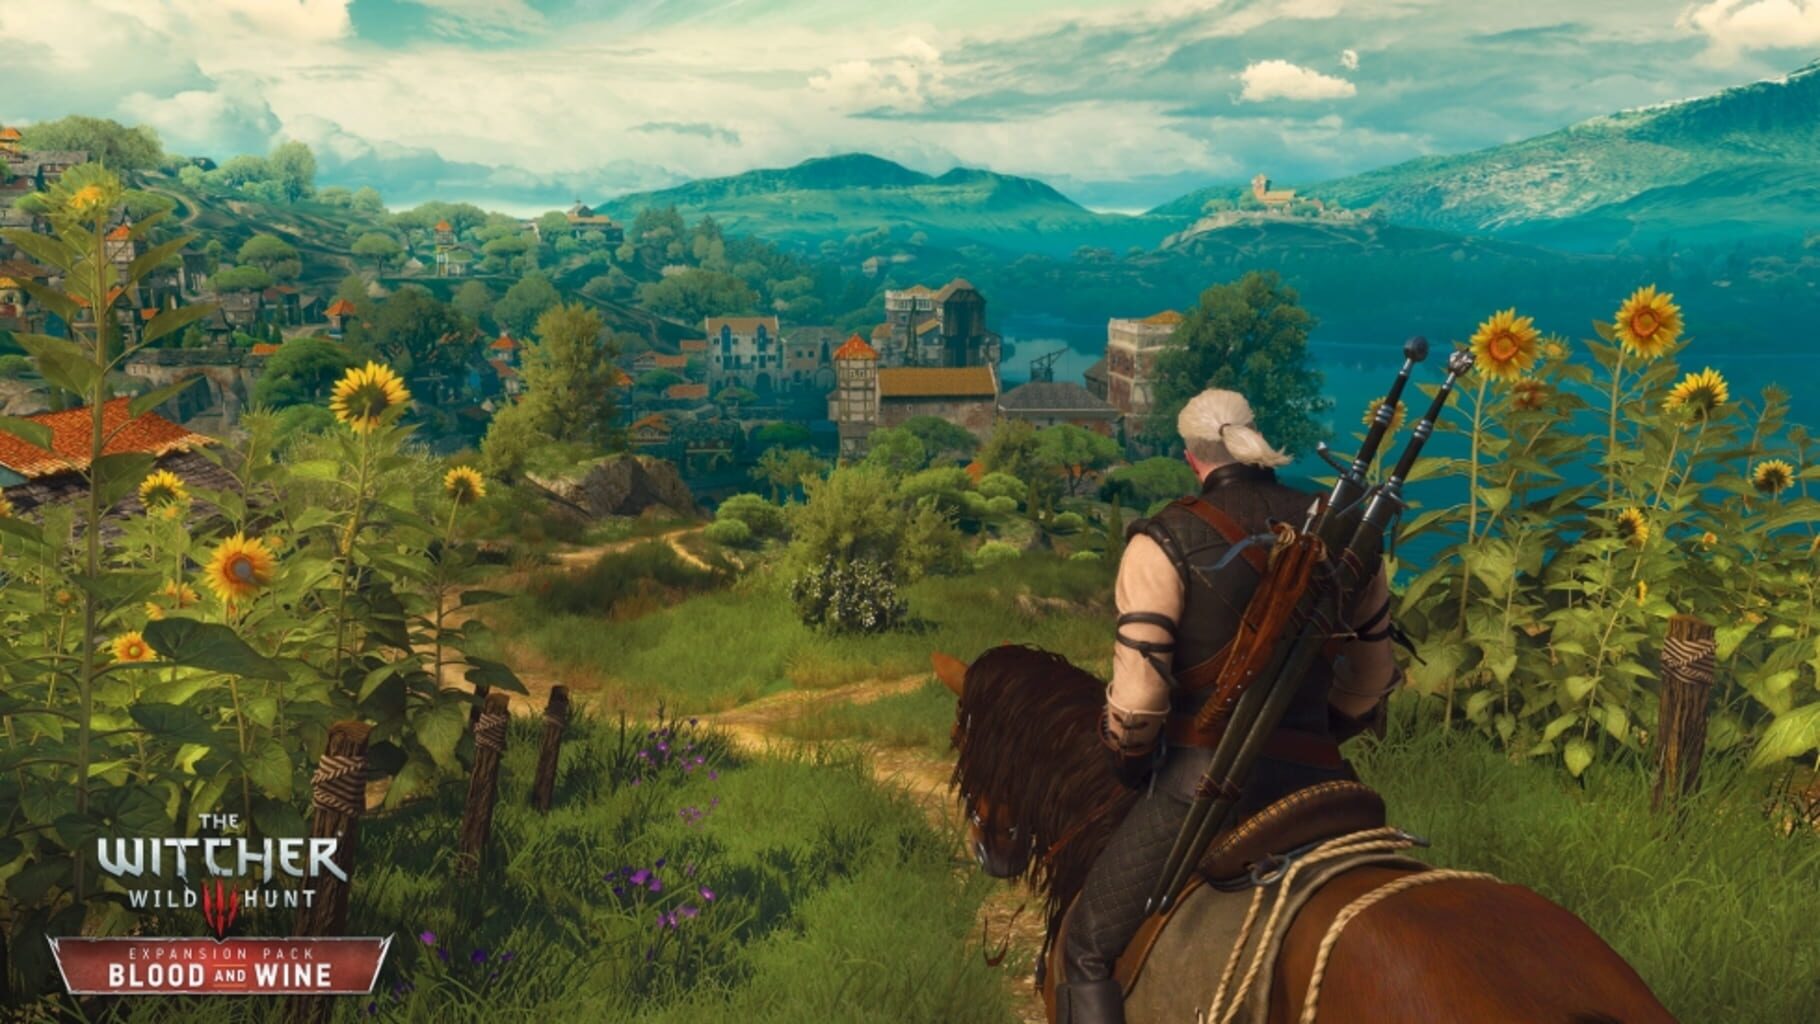 Captura de pantalla - The Witcher 3: Wild Hunt - Game of the Year Edition